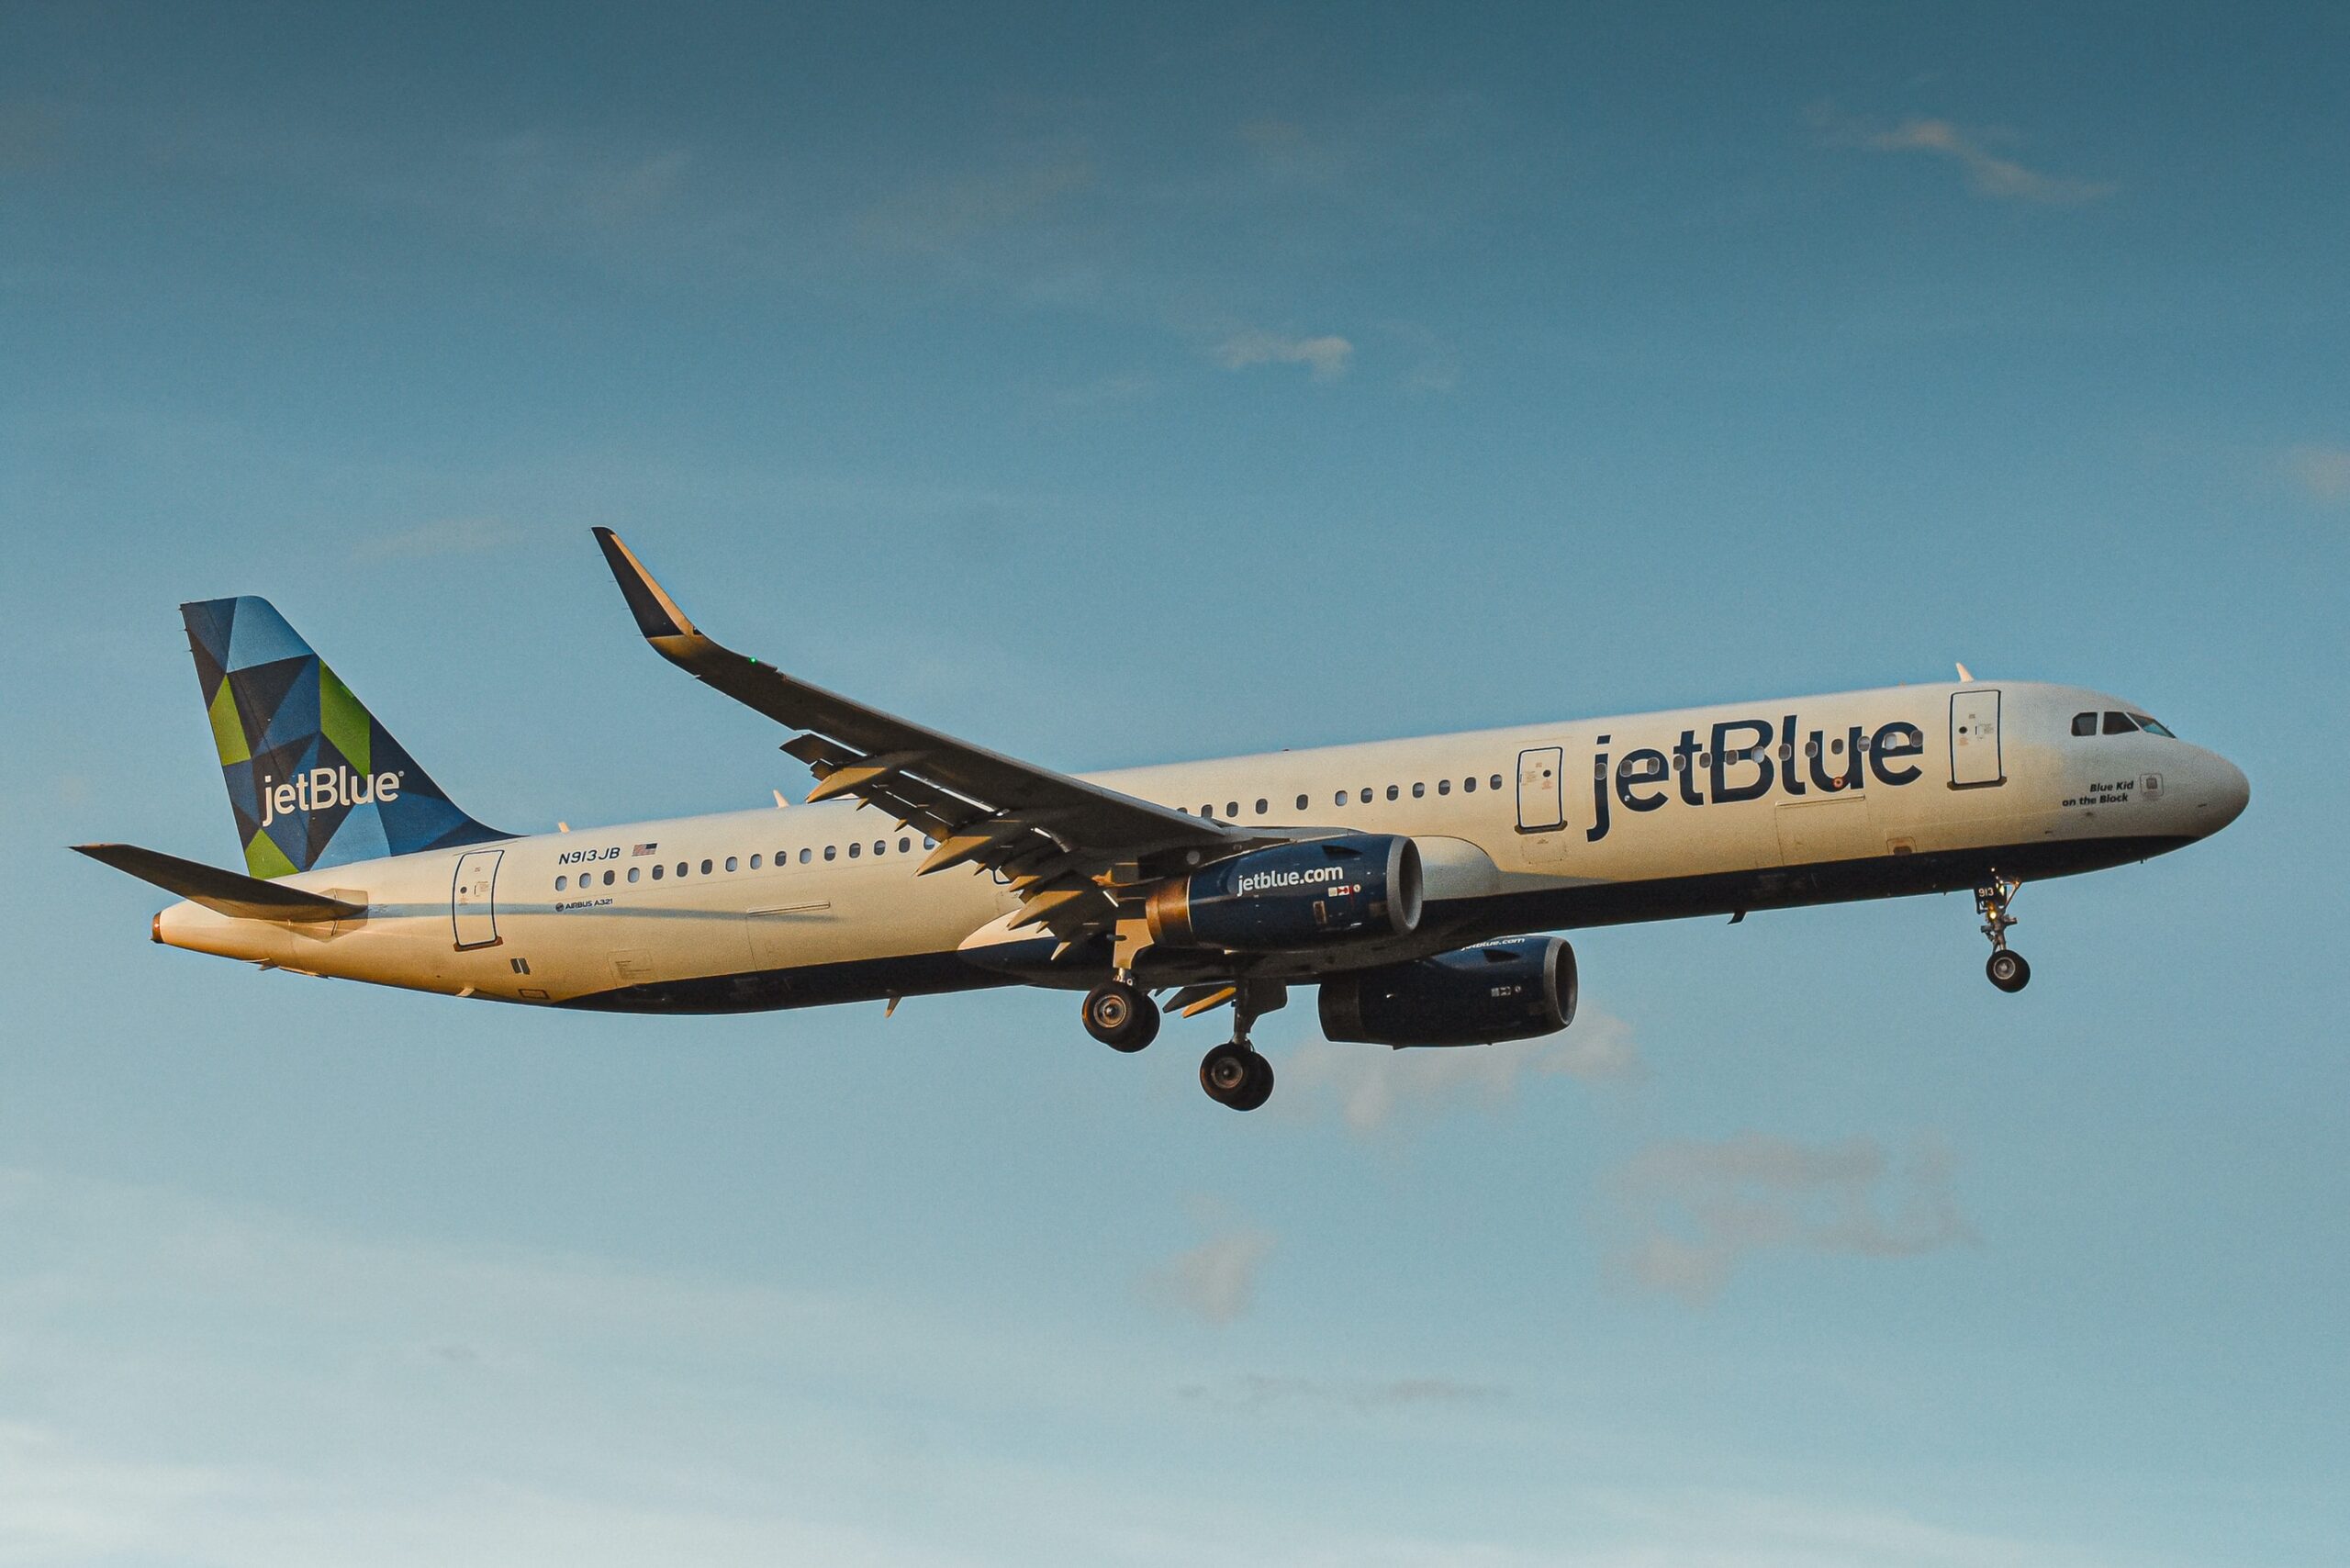 JetBlue has the highest quality in-flight environment and amenities. 
pictured: a JetBlue airplane in the air on a clear day